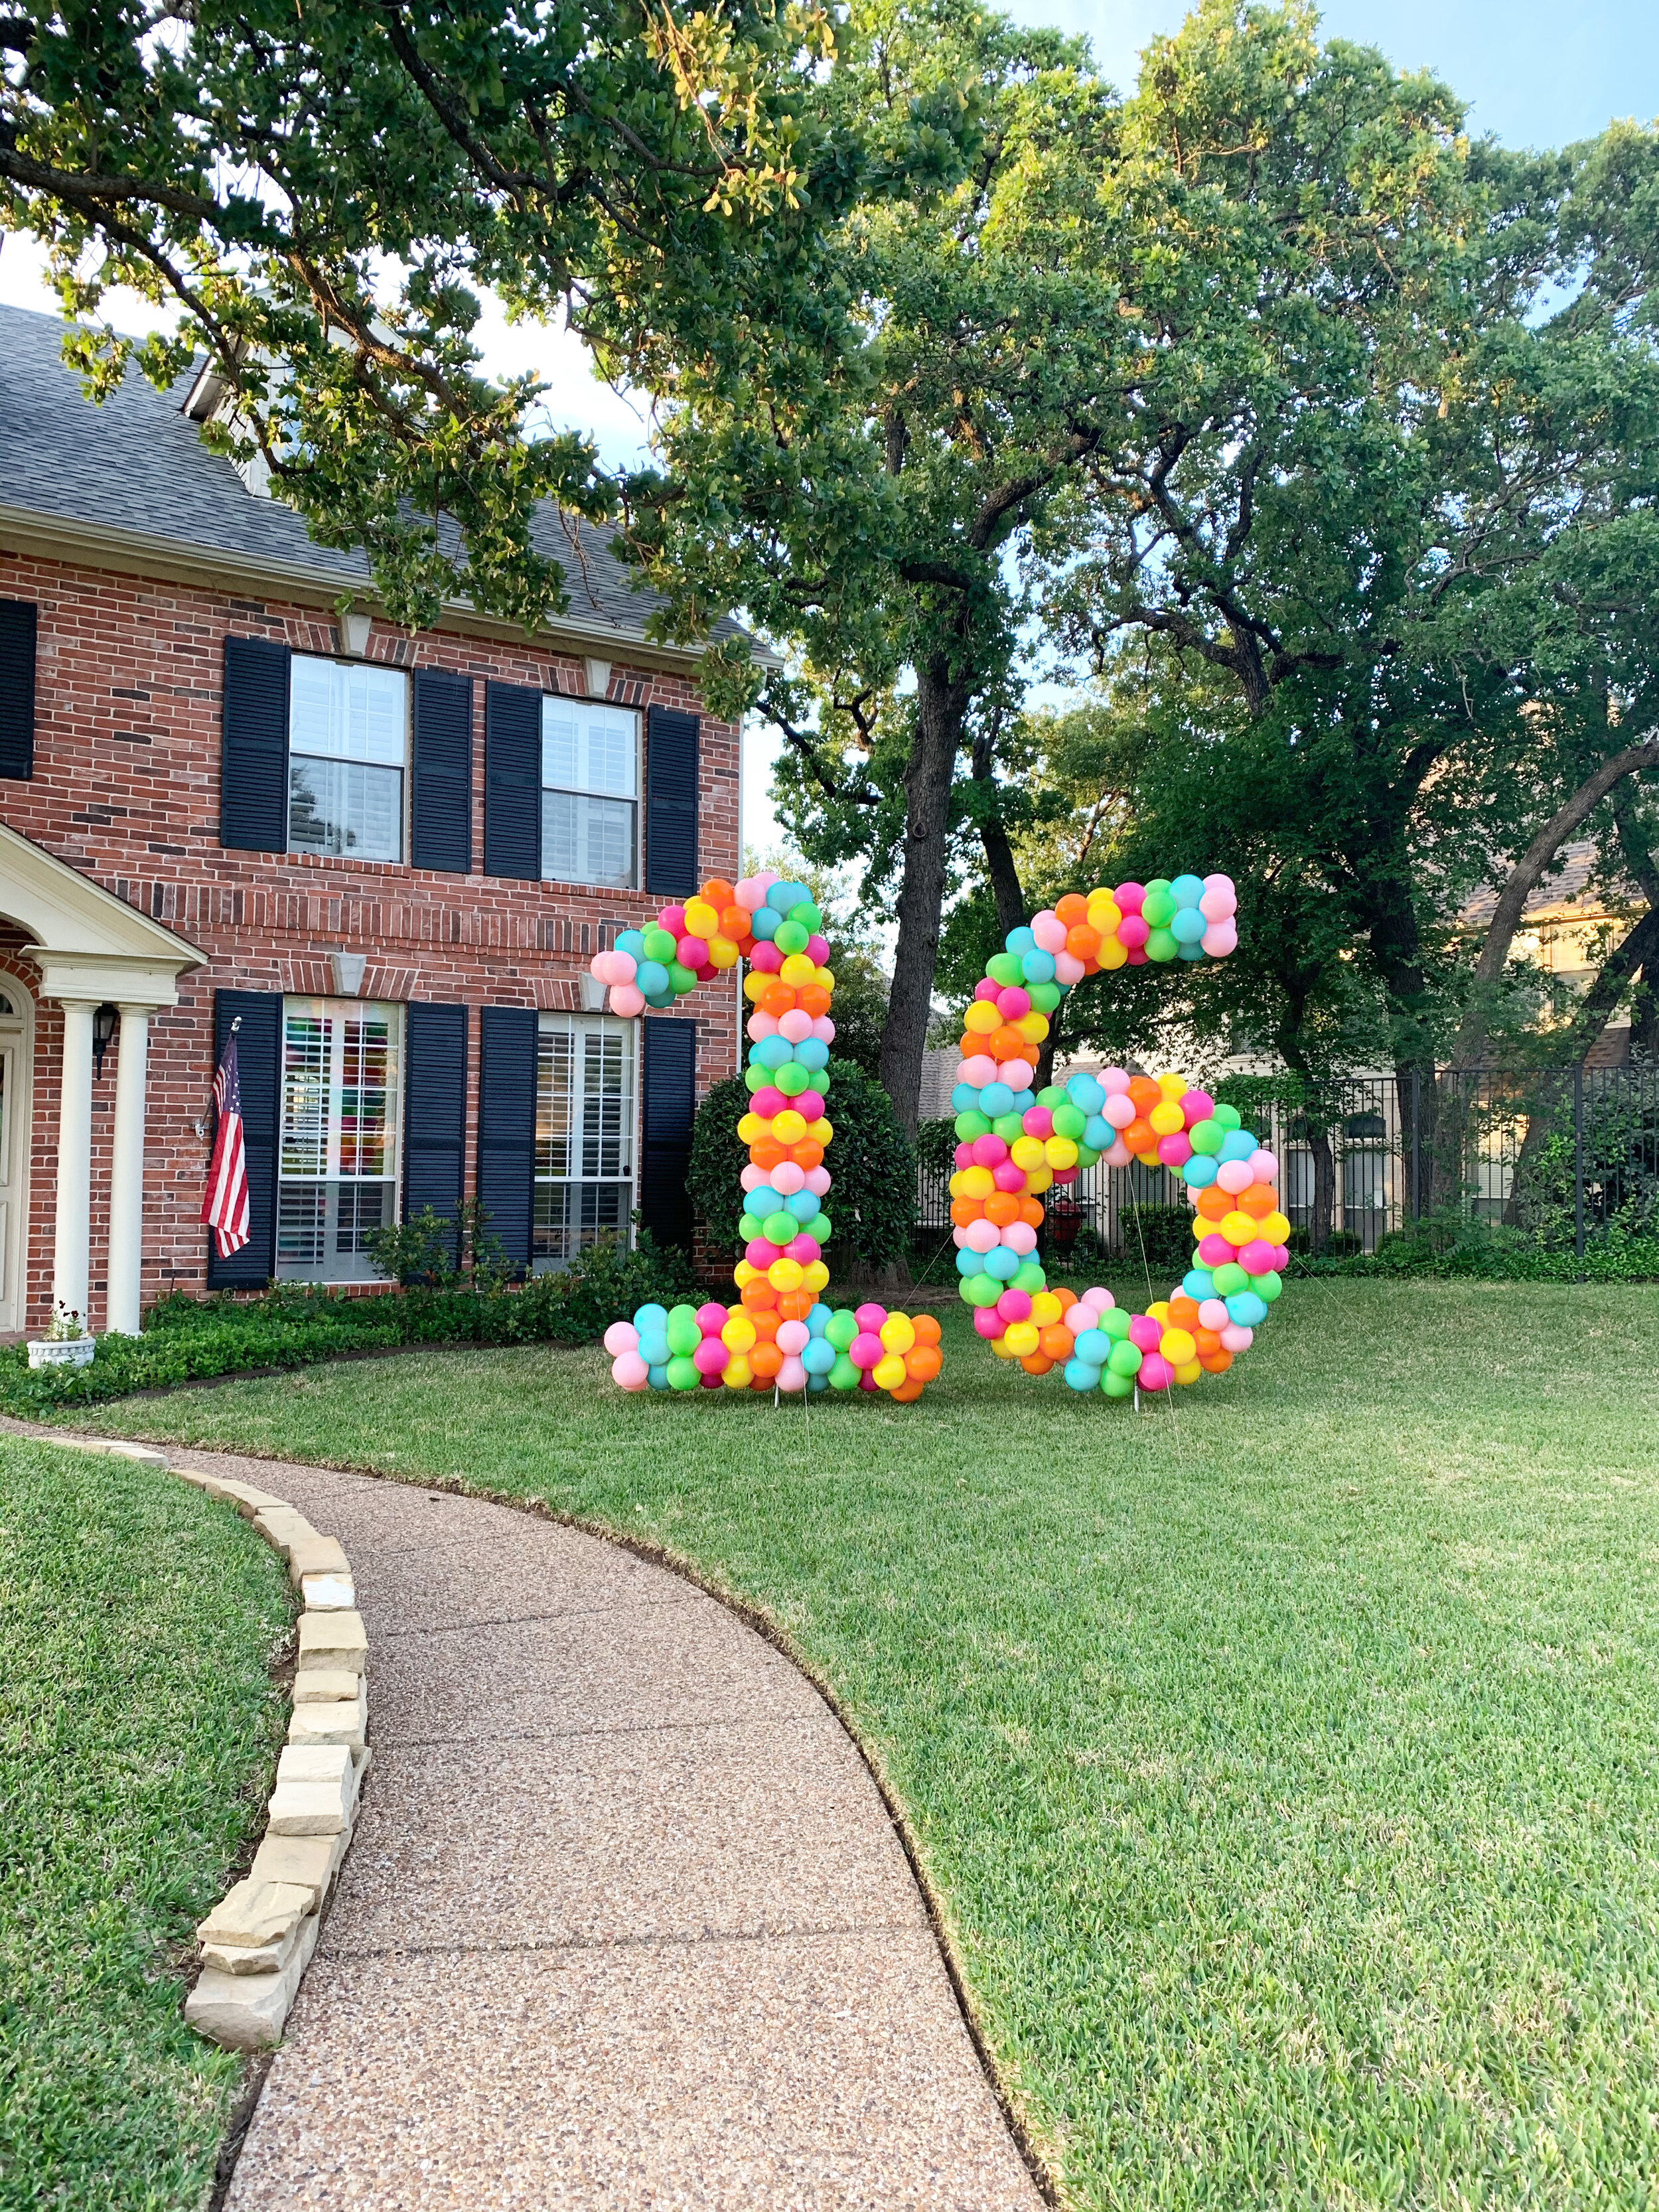  Balloon yard numbers in bright colors for Sweet 16 in Southlake, Texas 